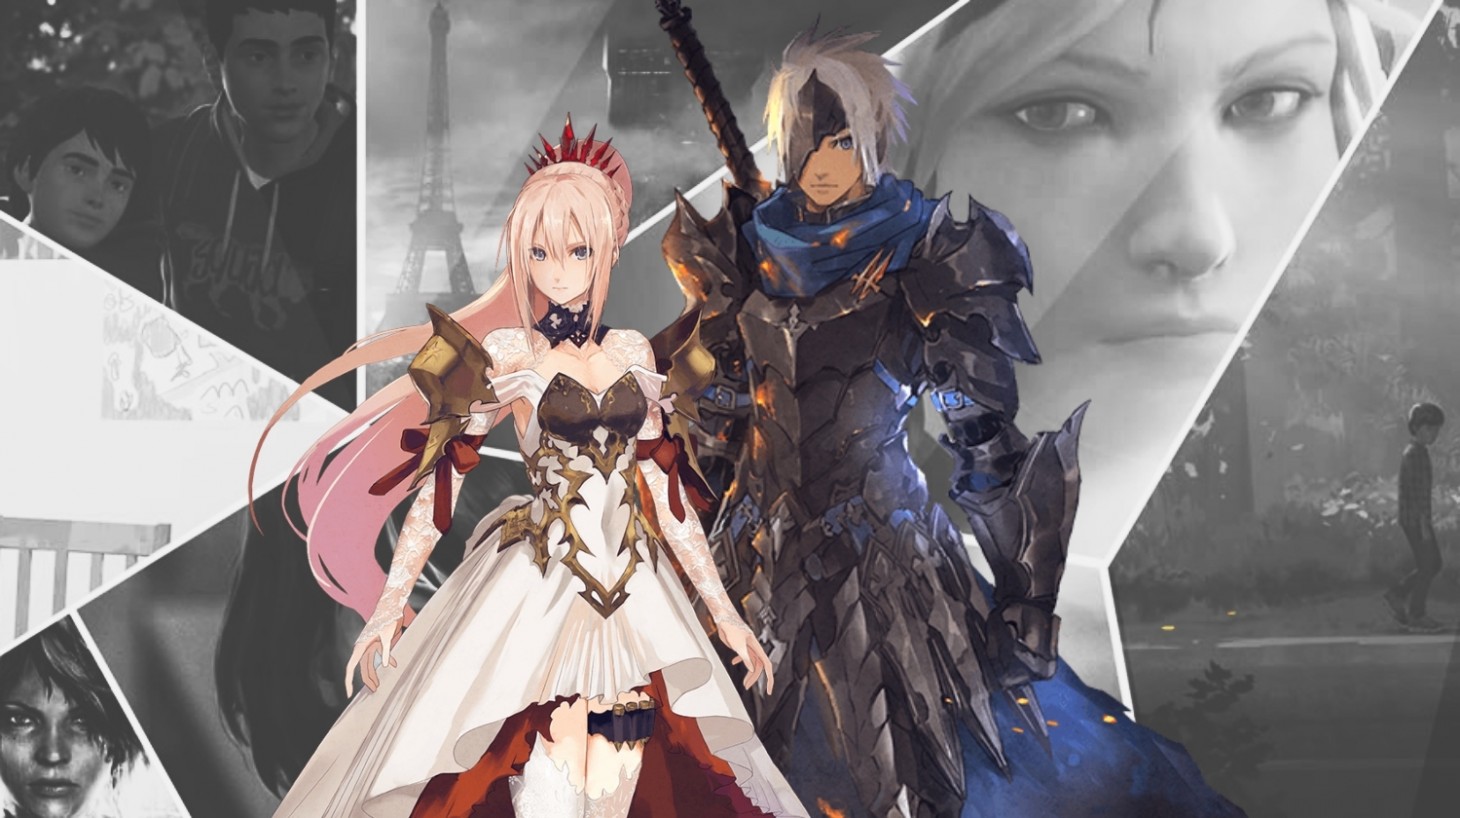 Tales of Arise' release date, trailer, platforms, gameplay, and story